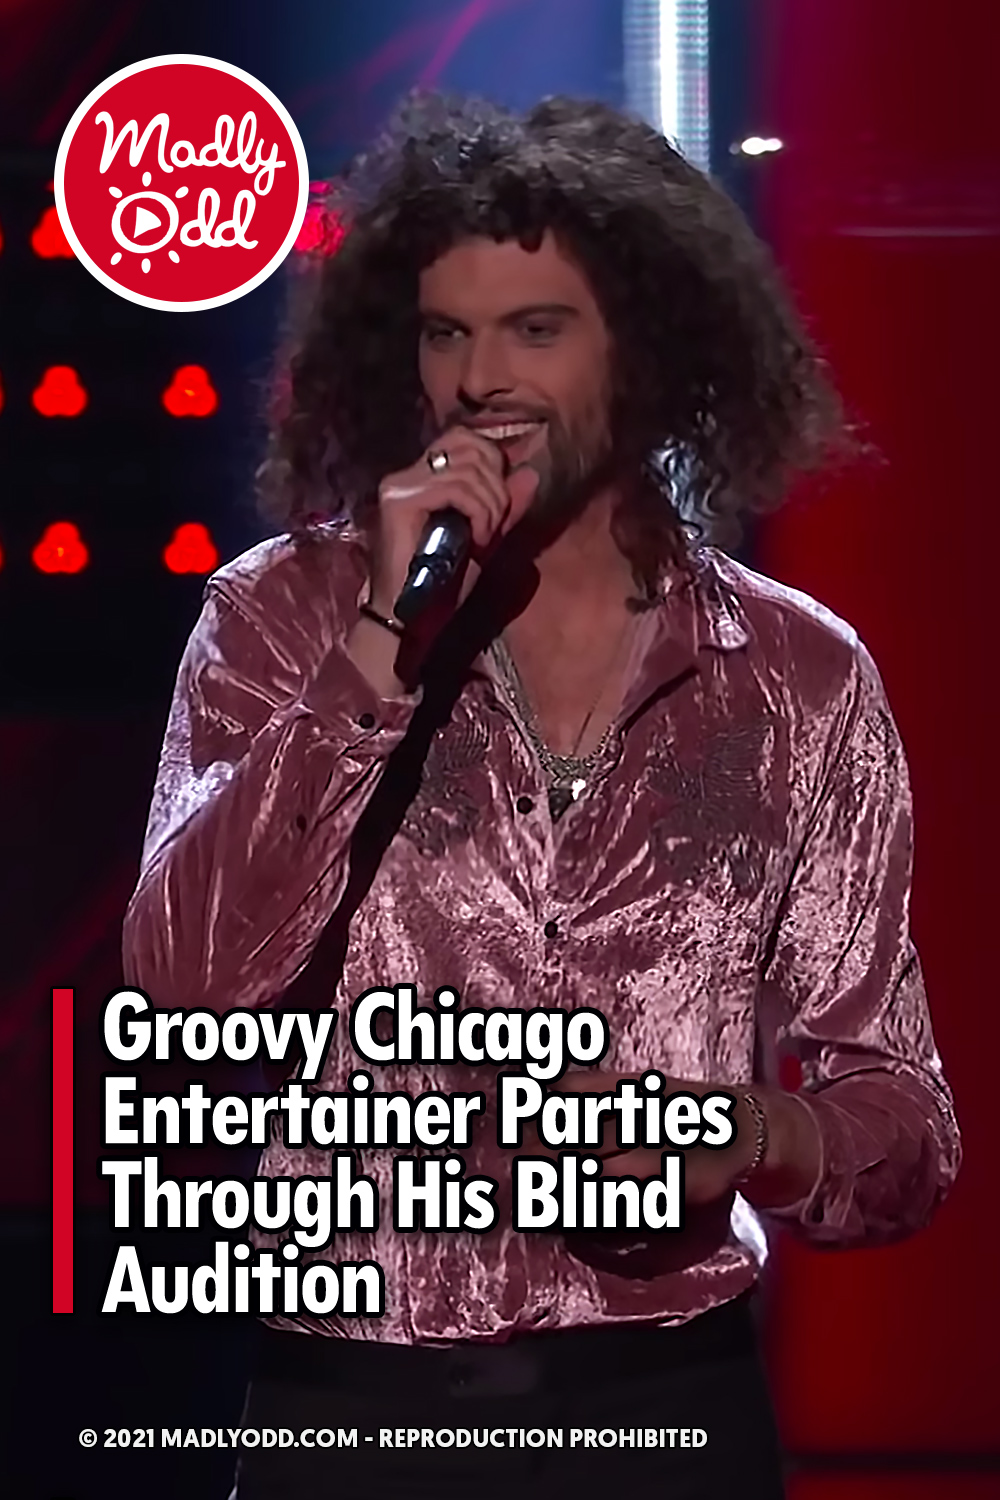 Groovy Chicago Entertainer Parties Through His Blind Audition